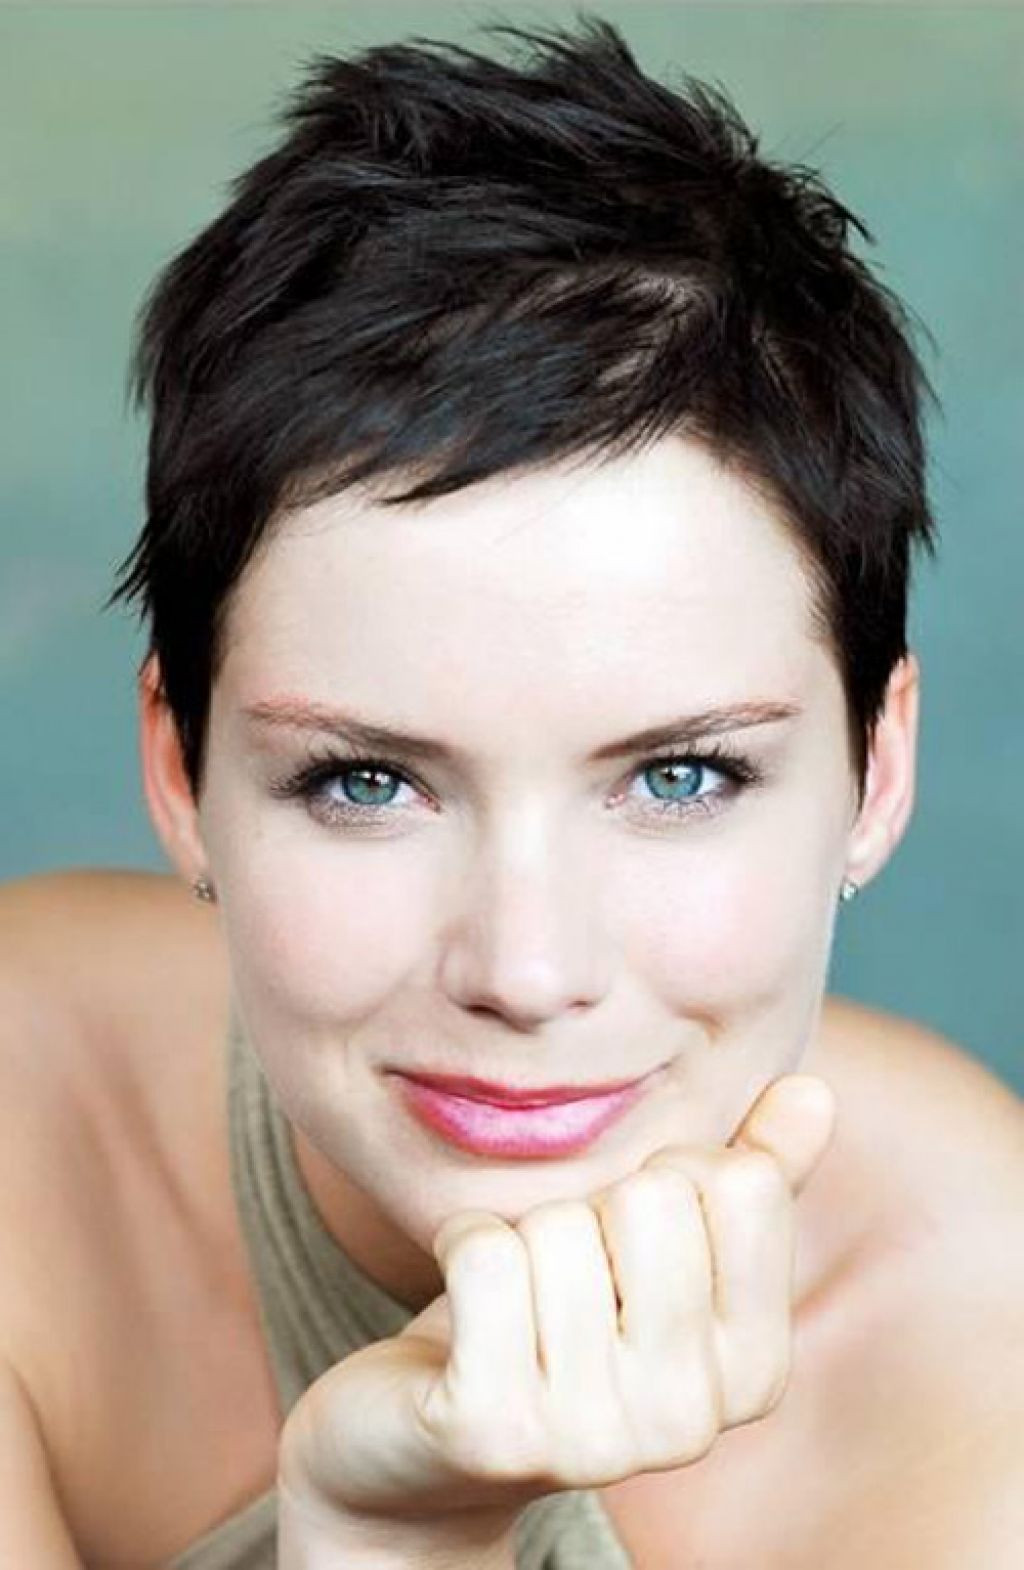 Super Short Female Haircuts
 Why Do Super Short Hairstyles Look So Beautiful on Older